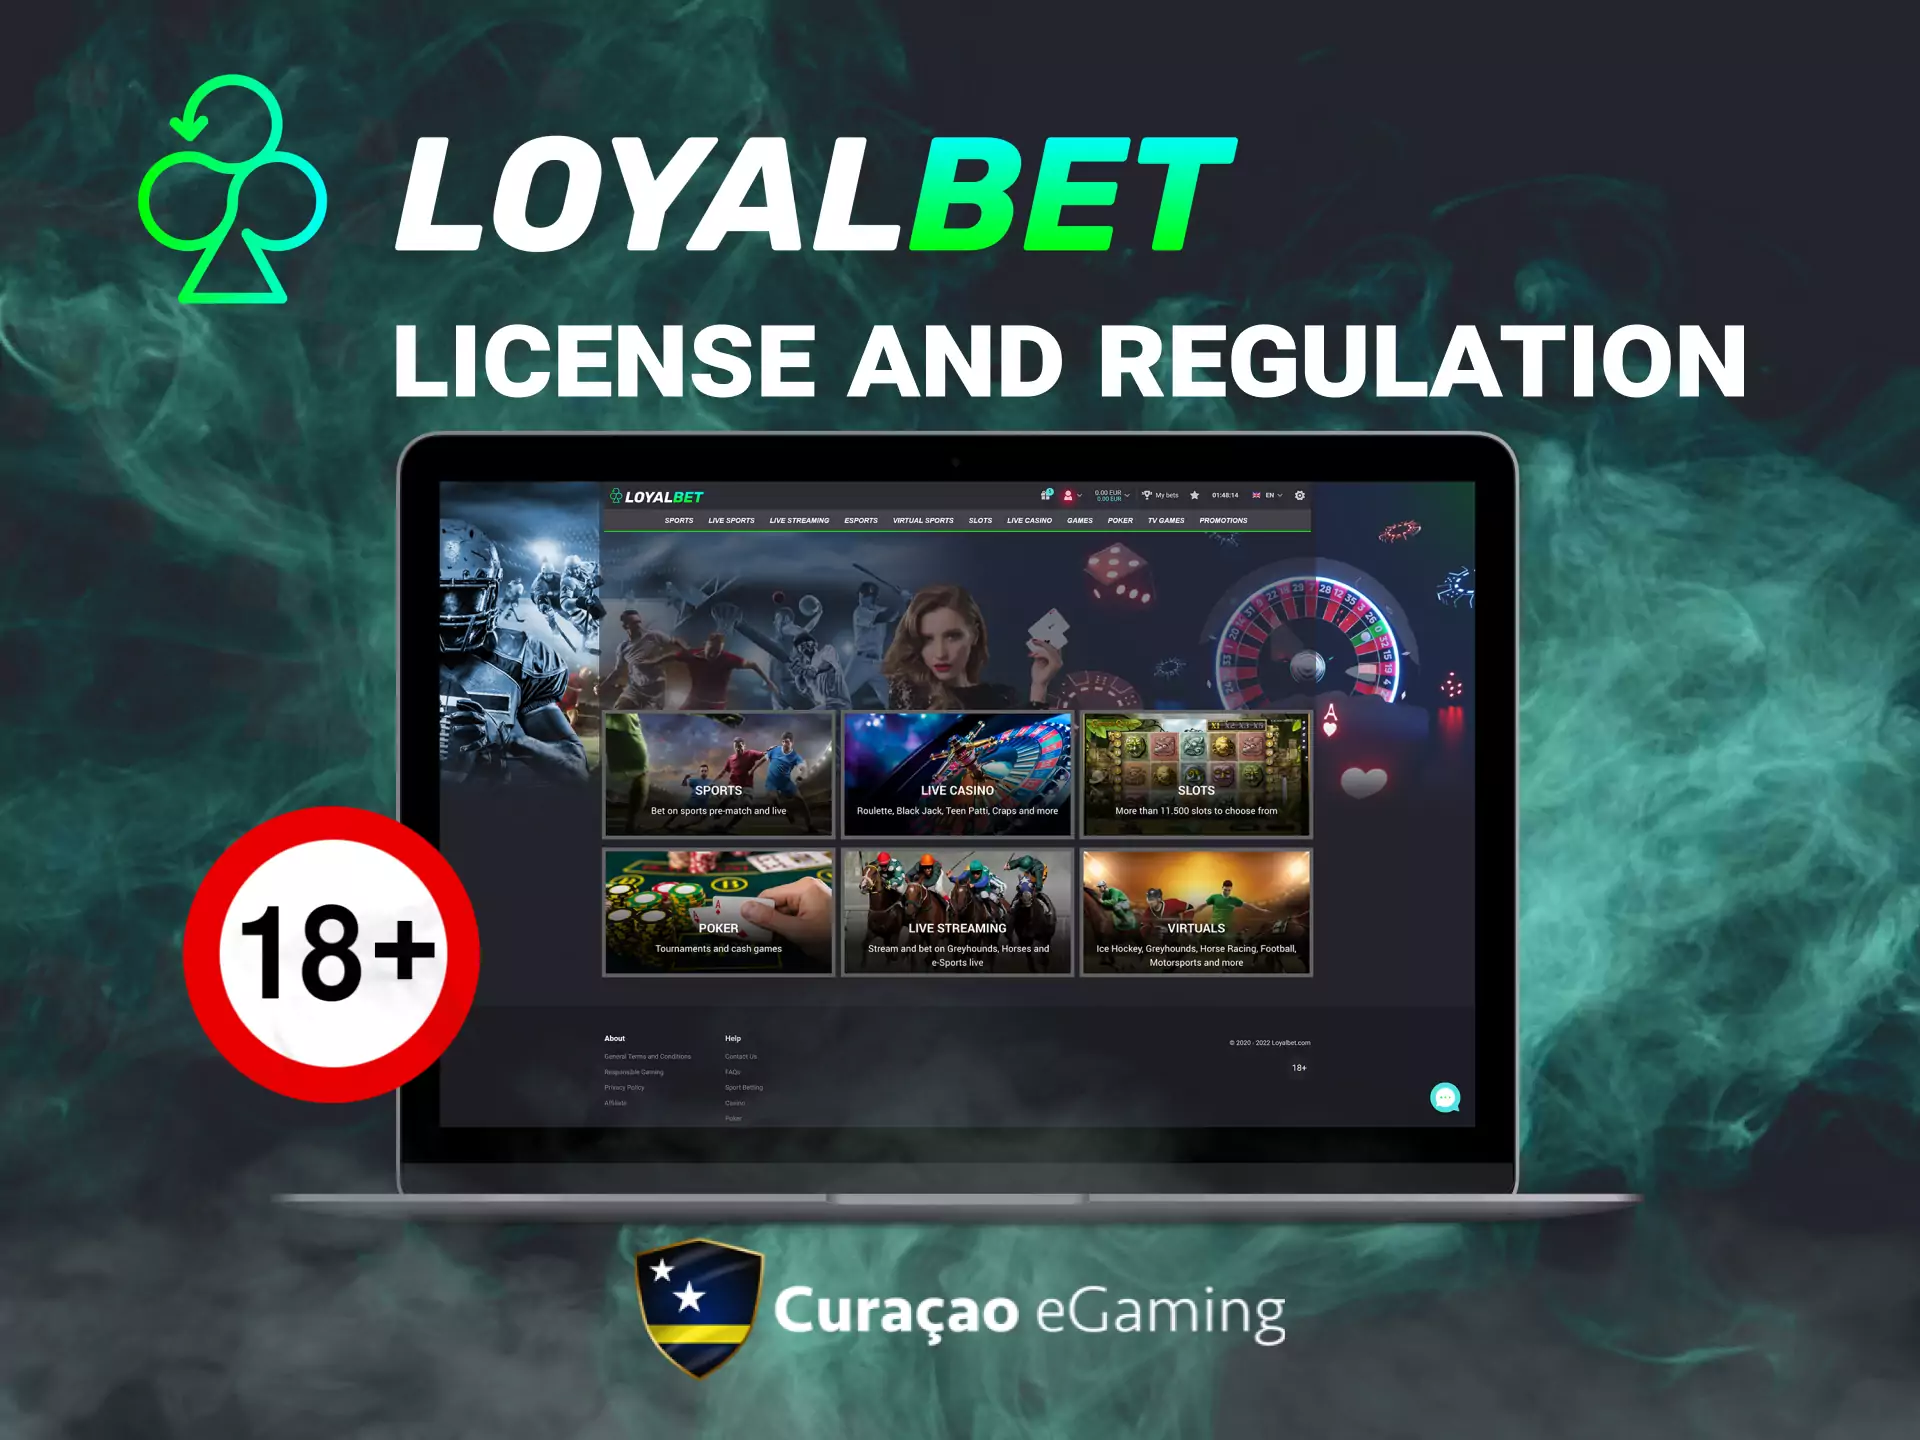 Loyalbet provides betting and casino entertainment under the Curacao Egaming license.